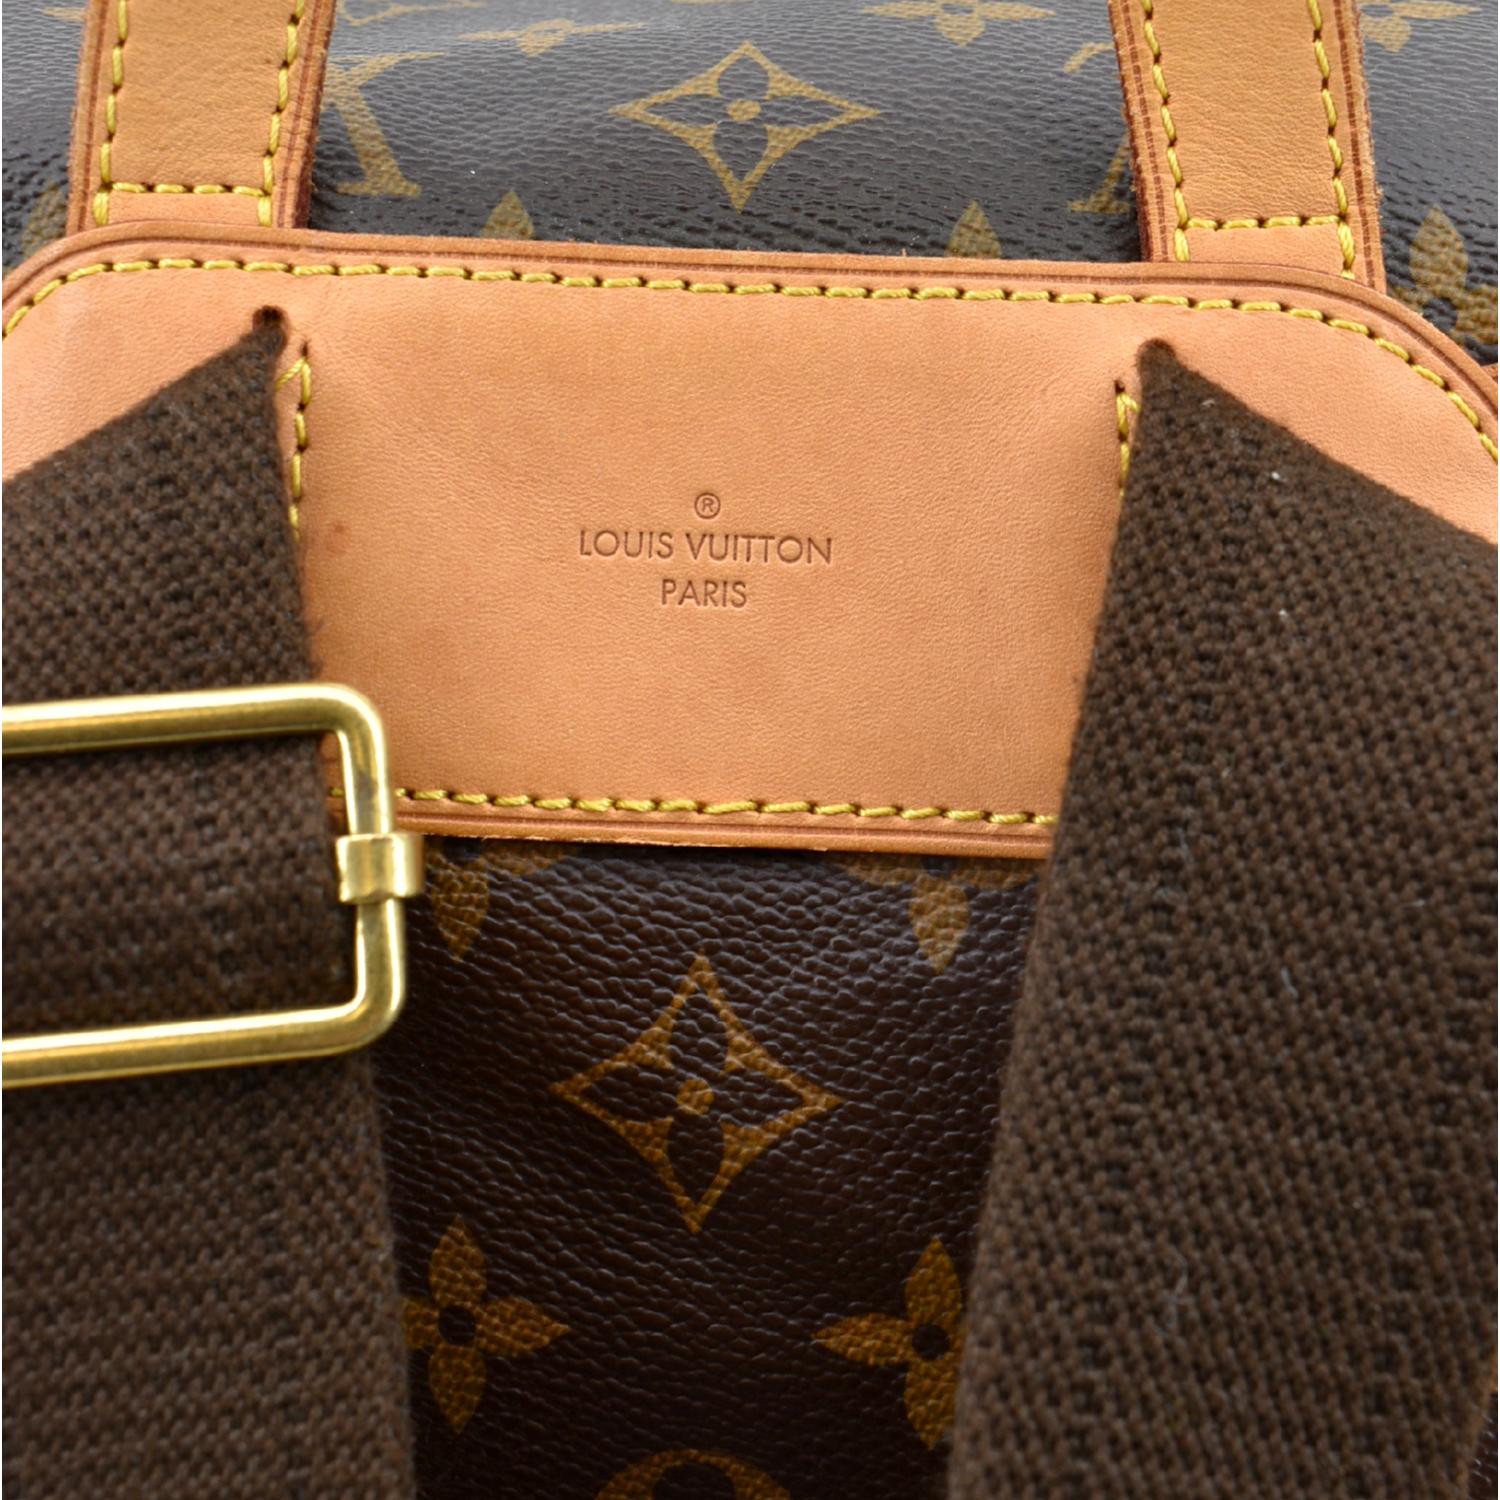 Date Code & Stamp] Louis Vuitton Bosphore Backpack